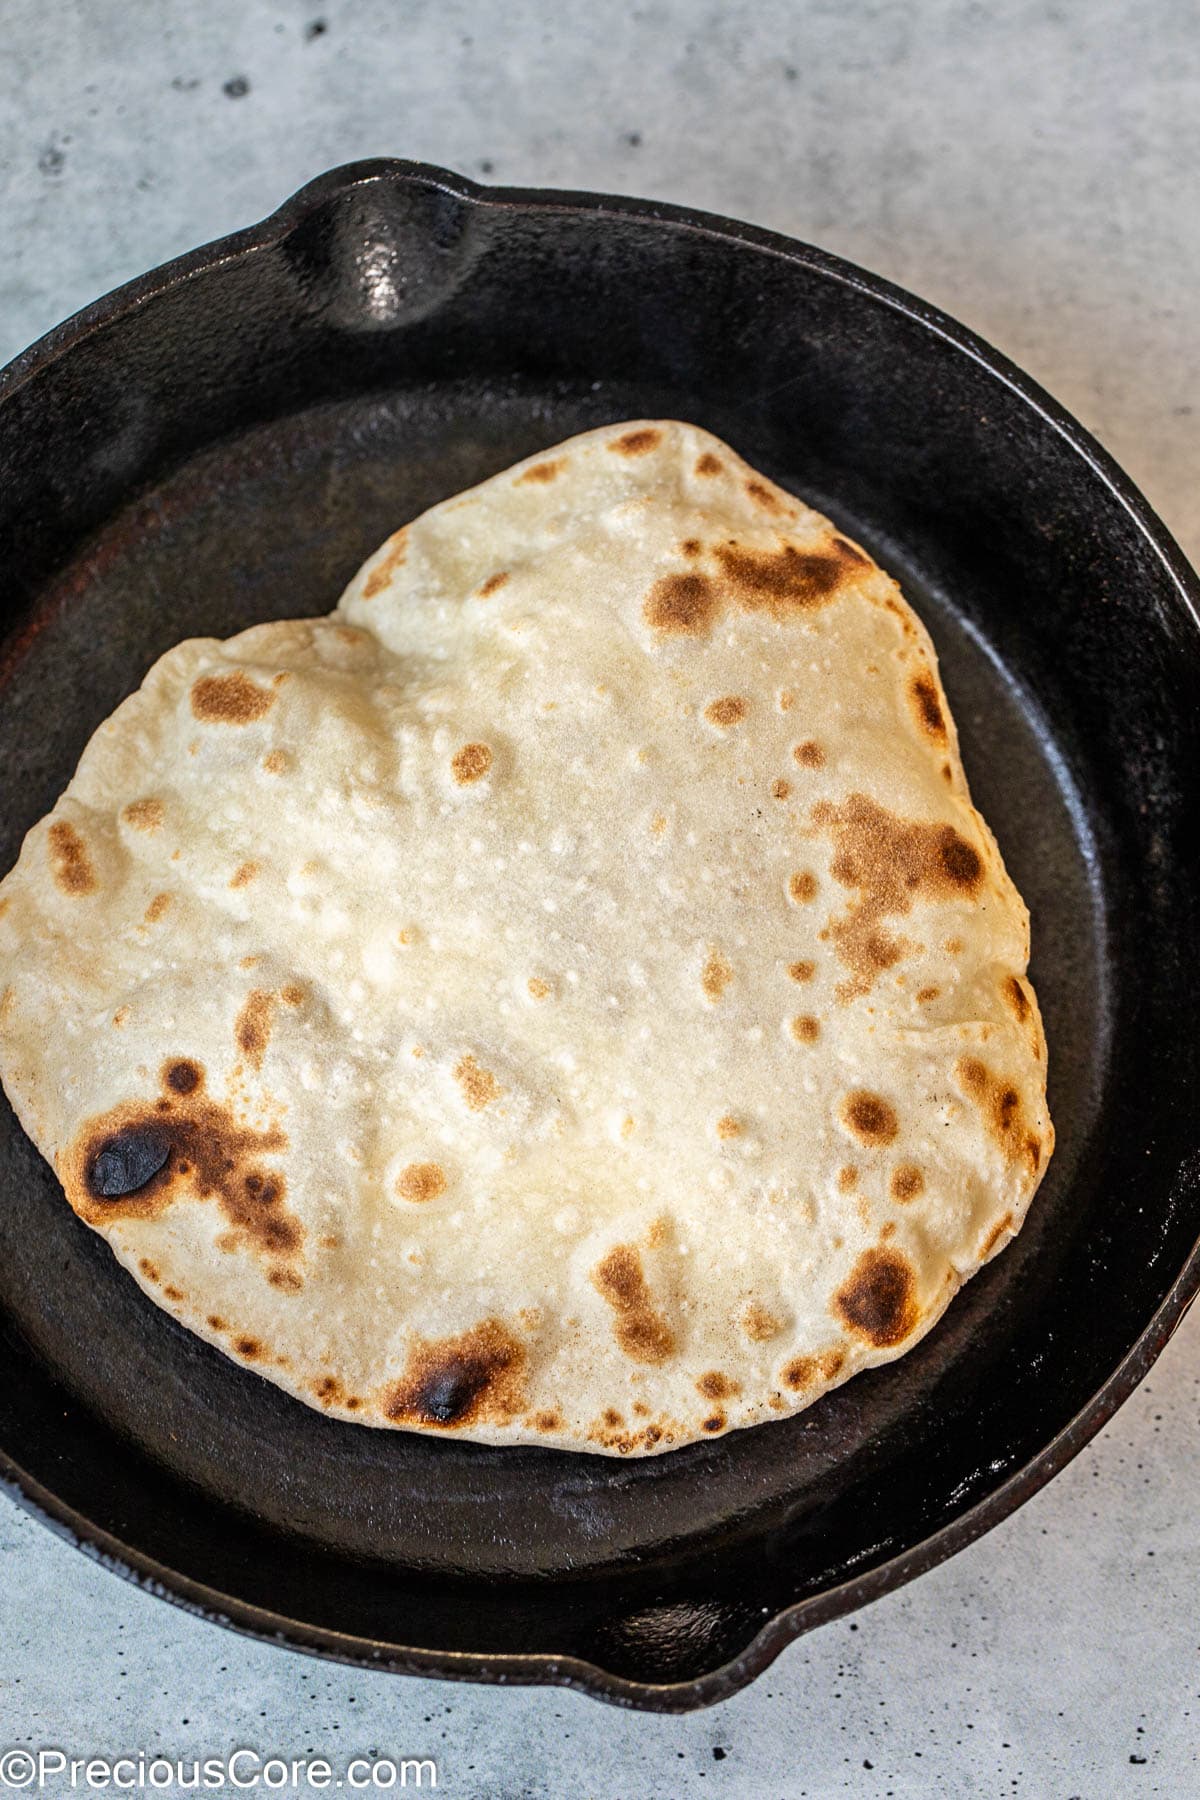 Shawarma bread puffing up in a skillet.